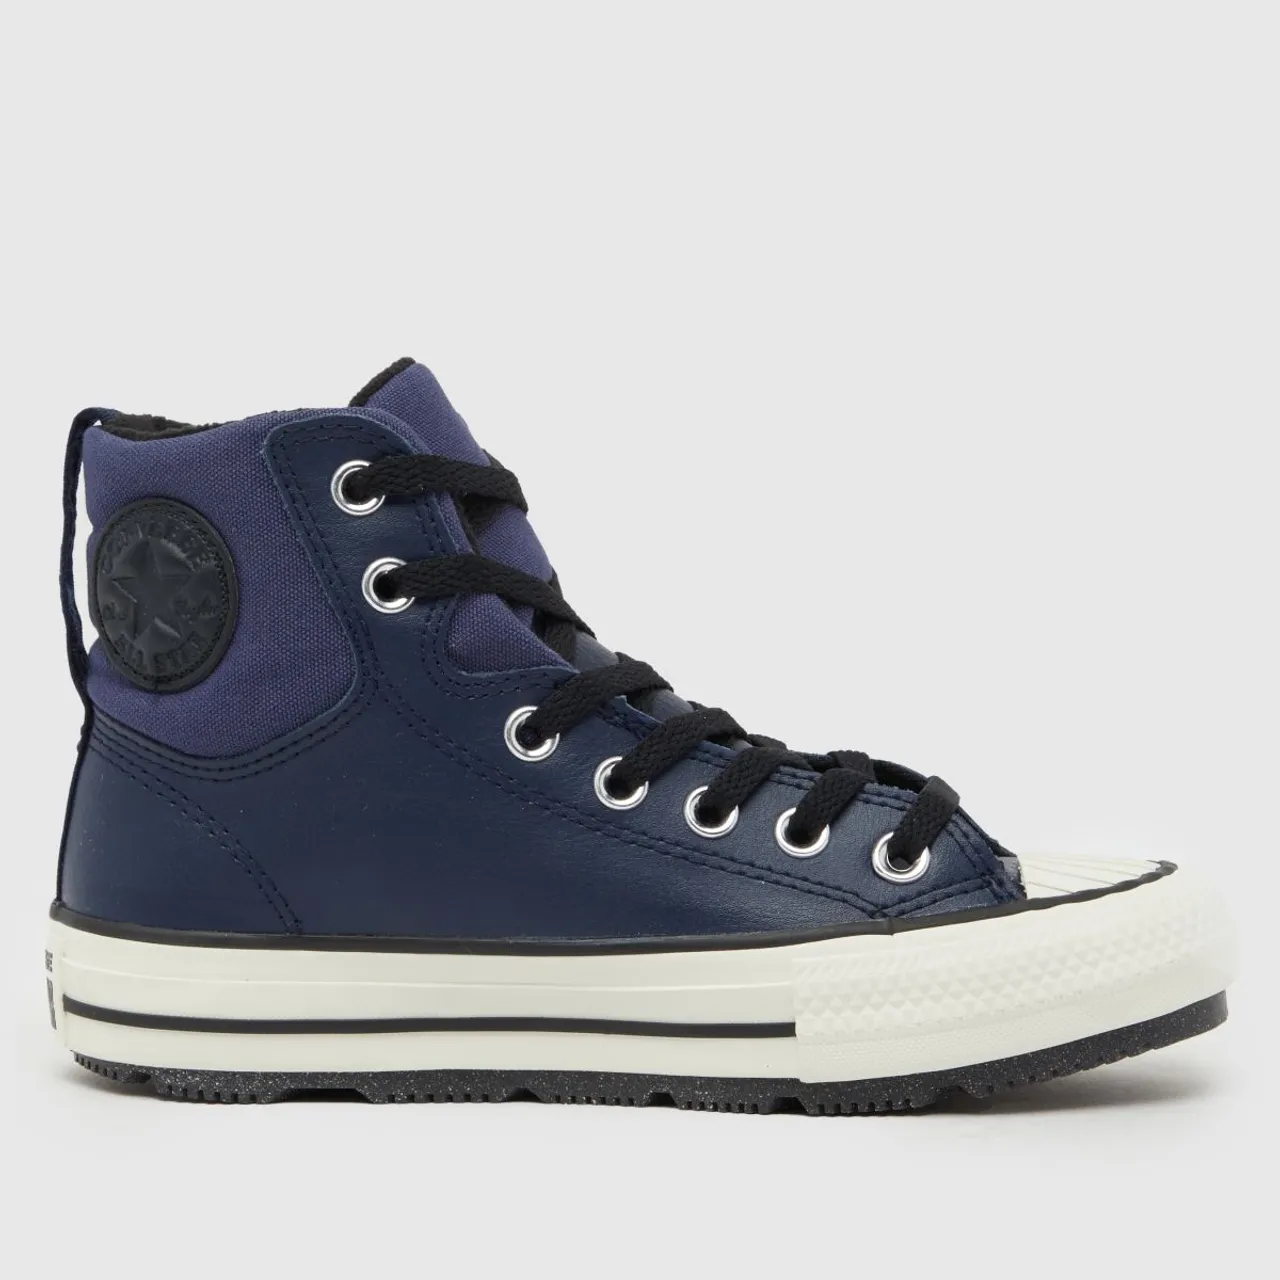 Converse Navy All Star Berkshire Boys Youth Trainers